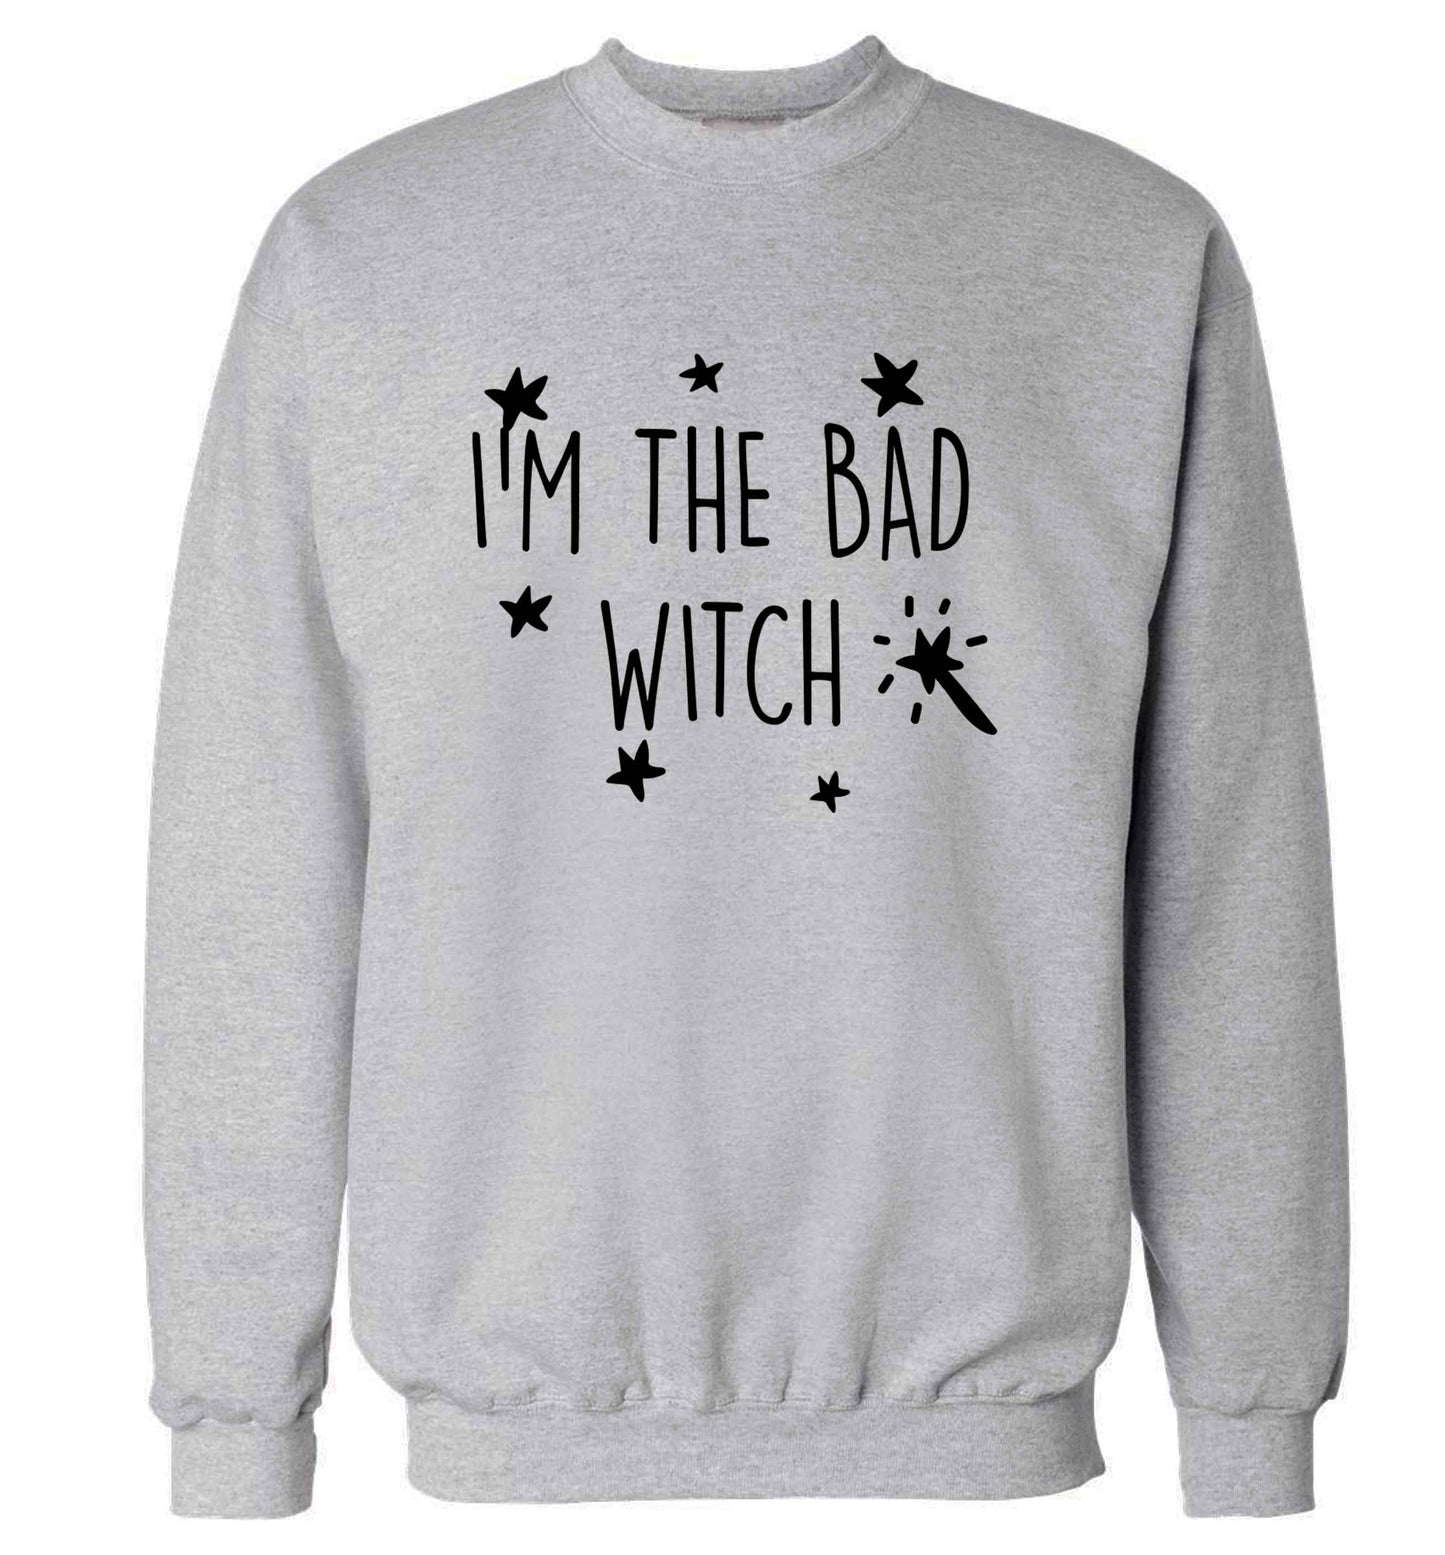 Bad witch adult's unisex grey sweater 2XL